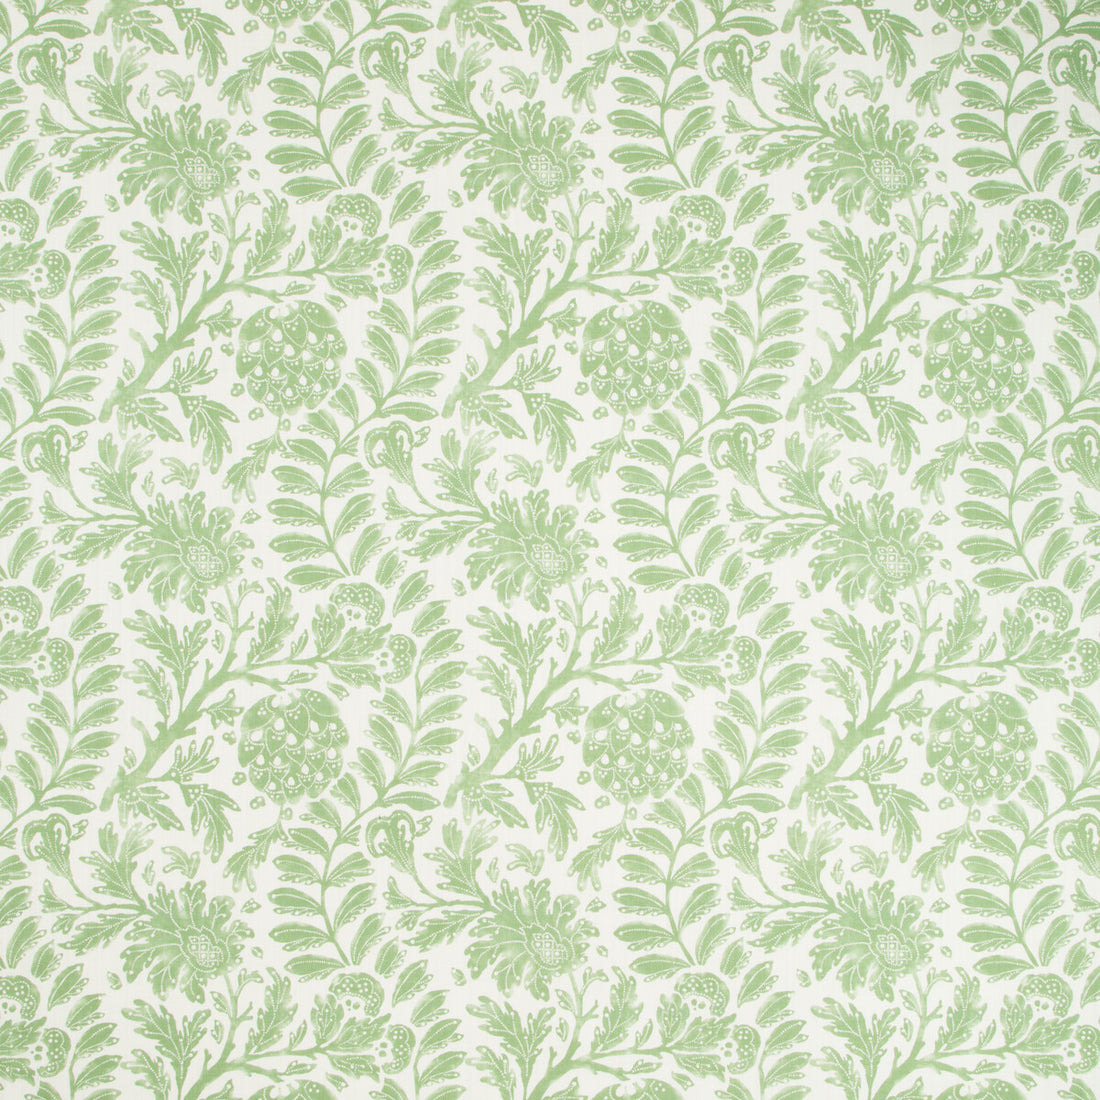 Wollerton fabric in leaf color - pattern WOLLERTON.3.0 - by Kravet Basics in the Greenwich collection